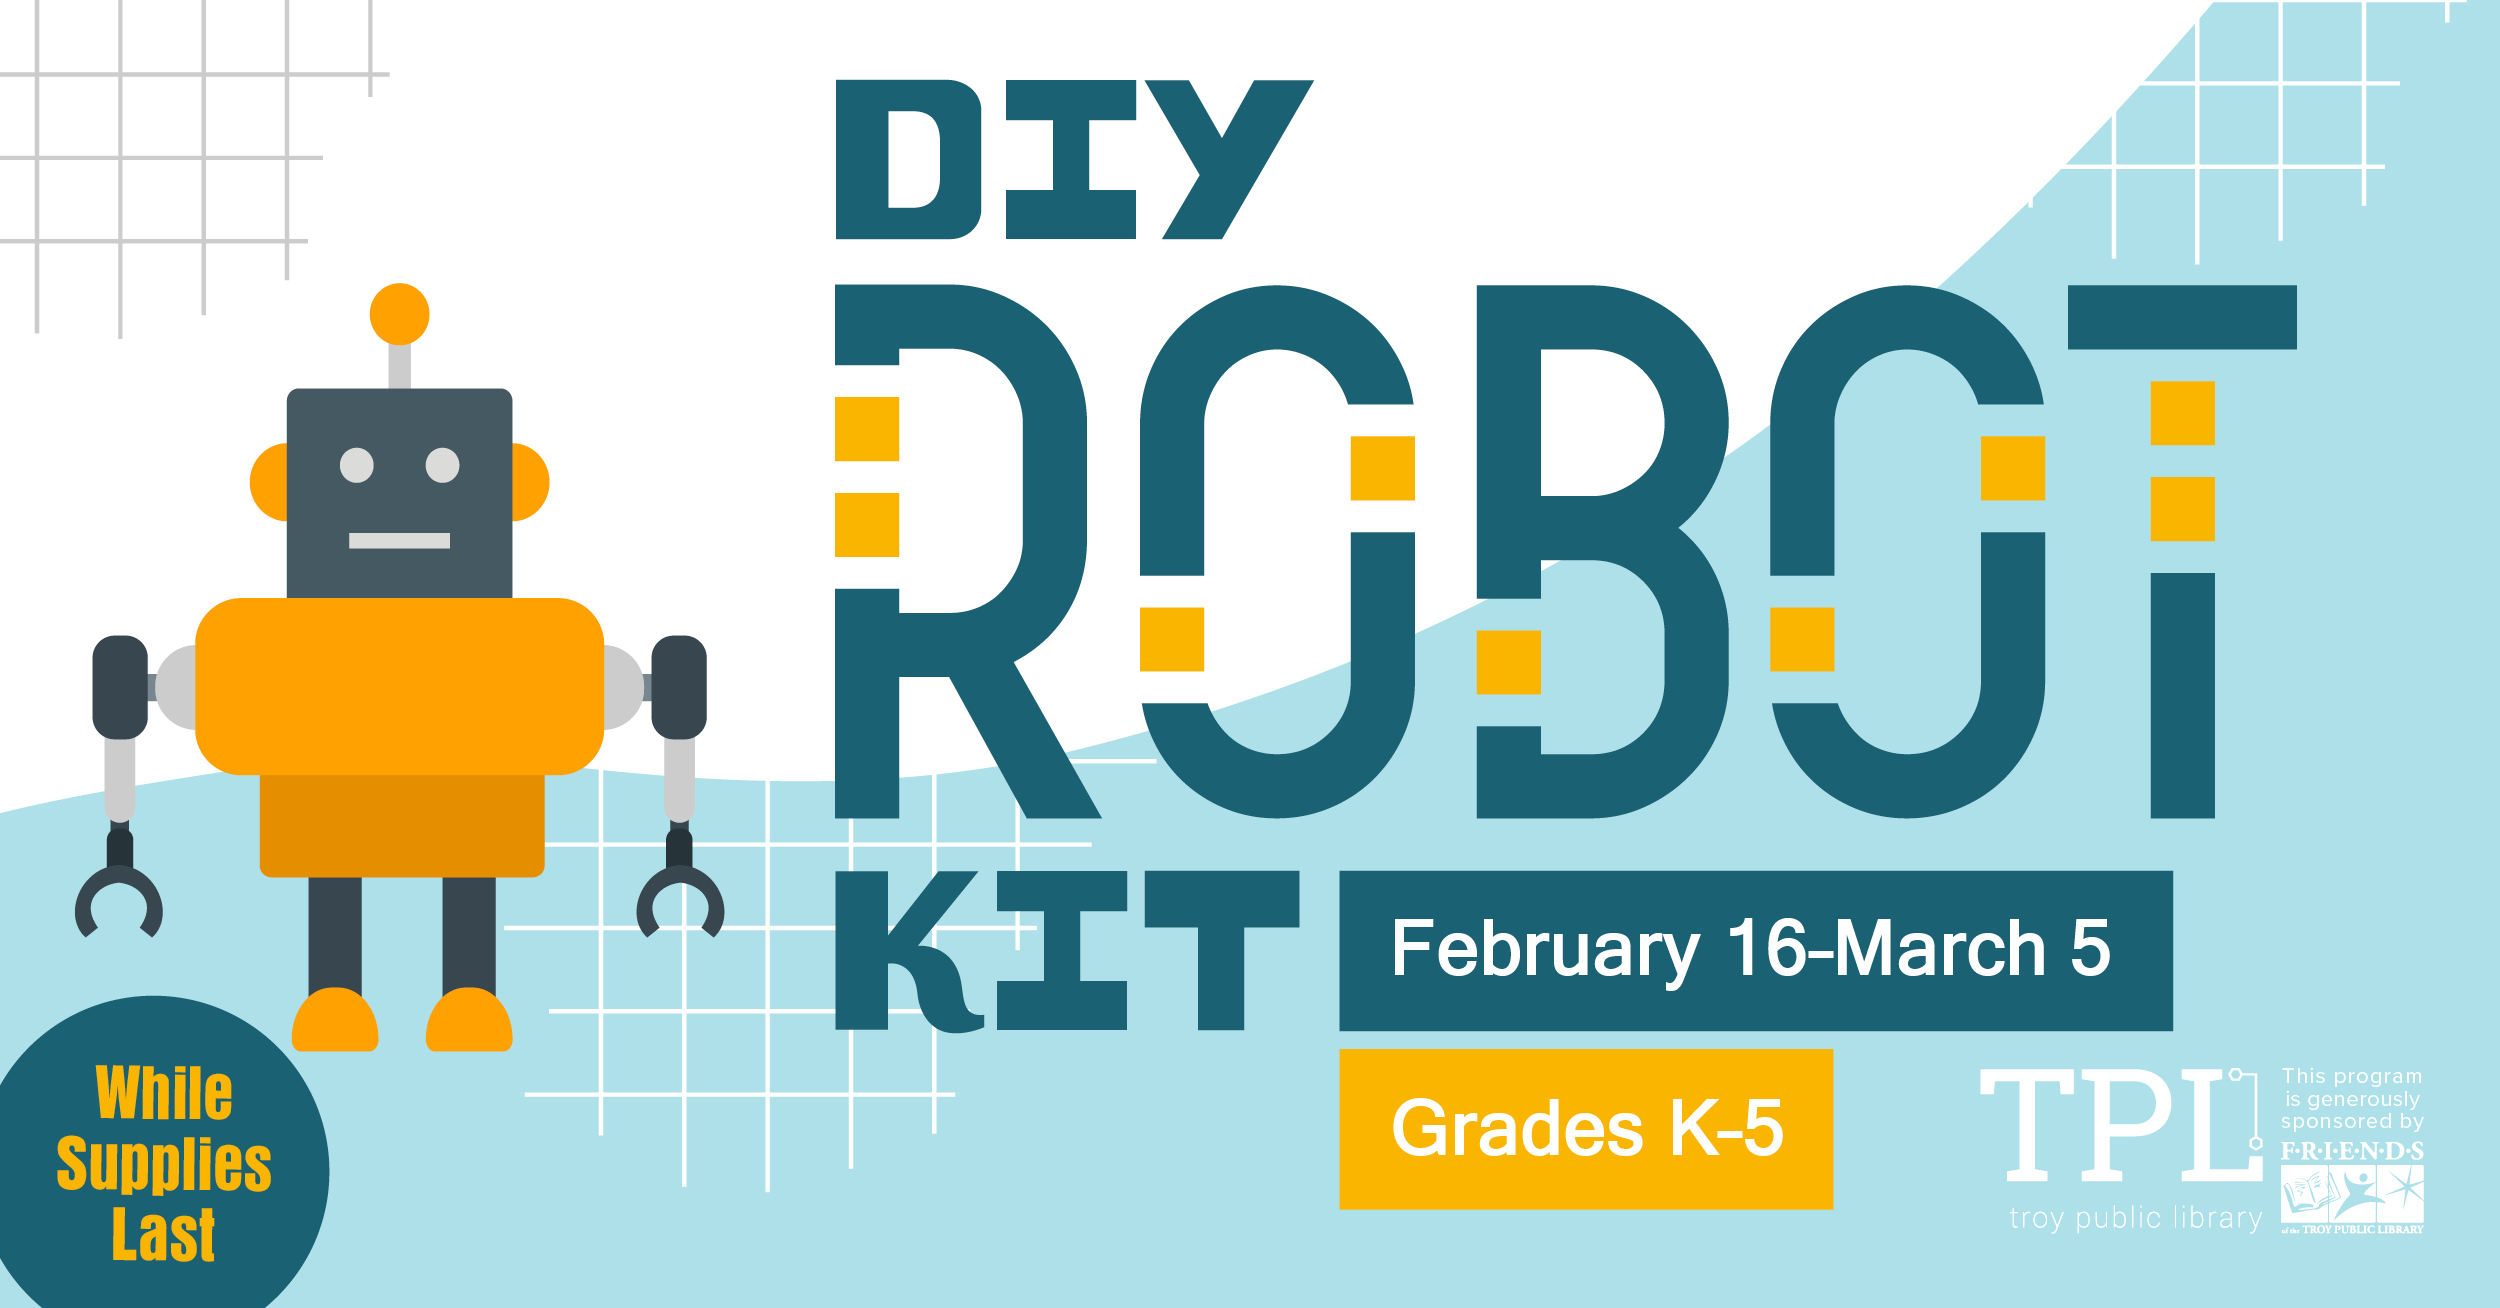 DIY Robot Kit February 16-March 5 While Supplies Last. Grades K-5